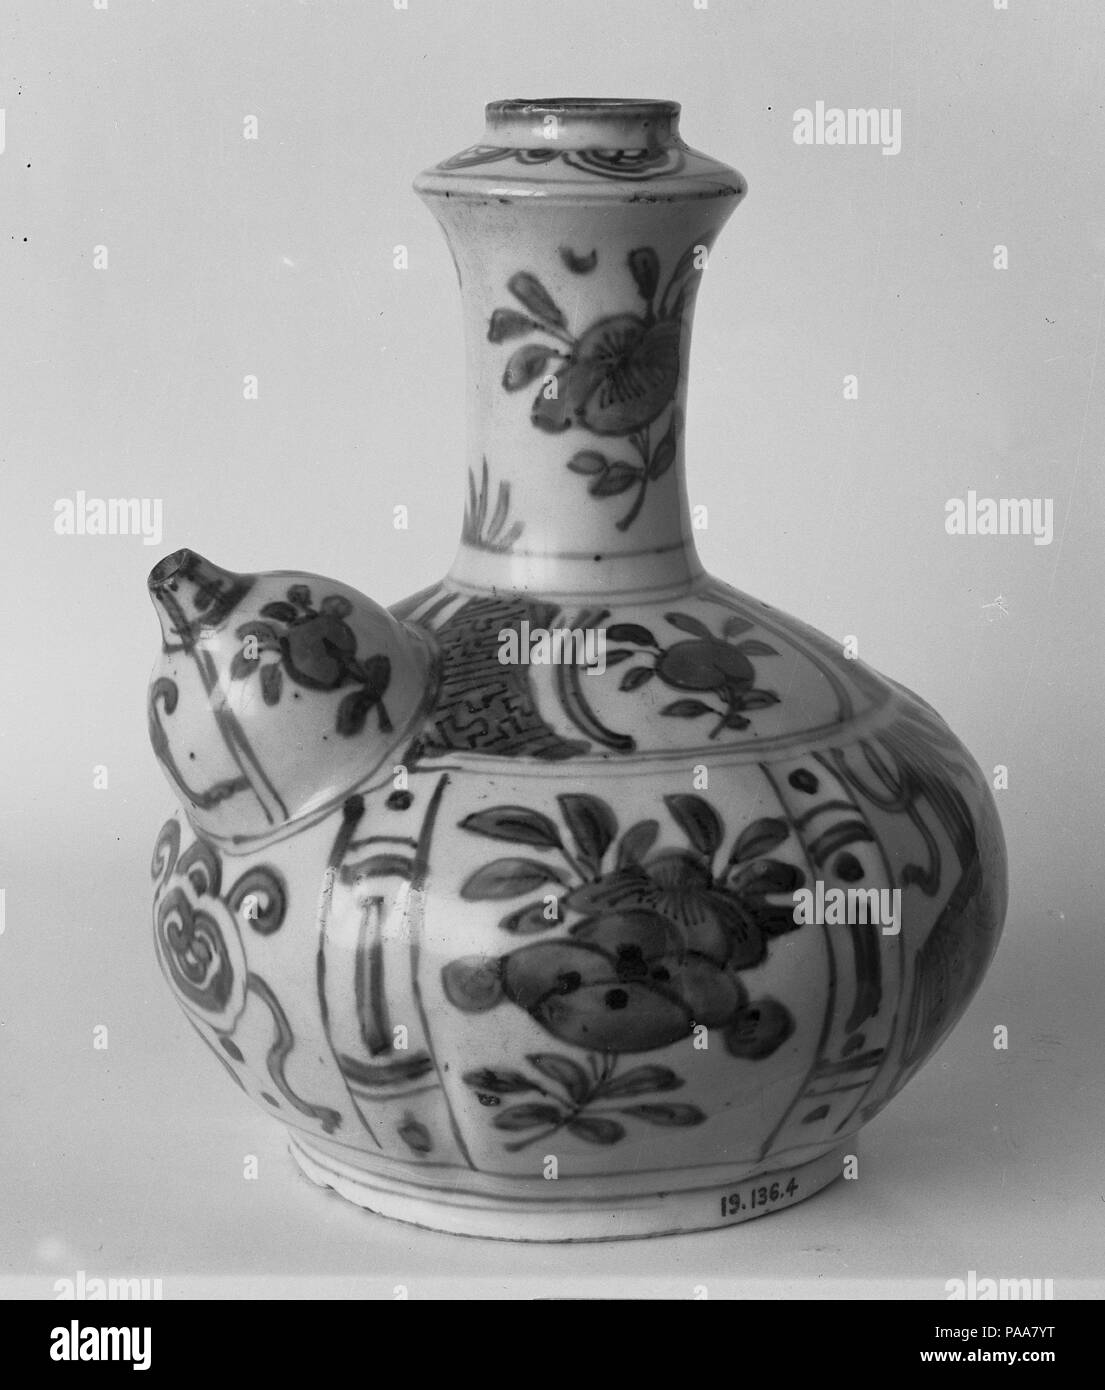 Pouring Vessel (Kendi) with Flowers and Fruits. Culture: China. Dimensions: H. 7 3/8 in. (18.7 cm); W. 5 1/2 in. (14 cm). Date: late 16th century.  Chinese manufacture of this drinking vessel with a long neck and a spout, known as kendi (a Malay word), began during the fourteenth century for export to Muslim communities in Southeast Asia. By the sixteenth century it was carried farther afield to the Middle East, where Persian copies were made. This late sixteenth-century version, not necessarily made for export to Europe, is decorated in patterns that commonly were applied to kraak porcelain.  Stock Photo